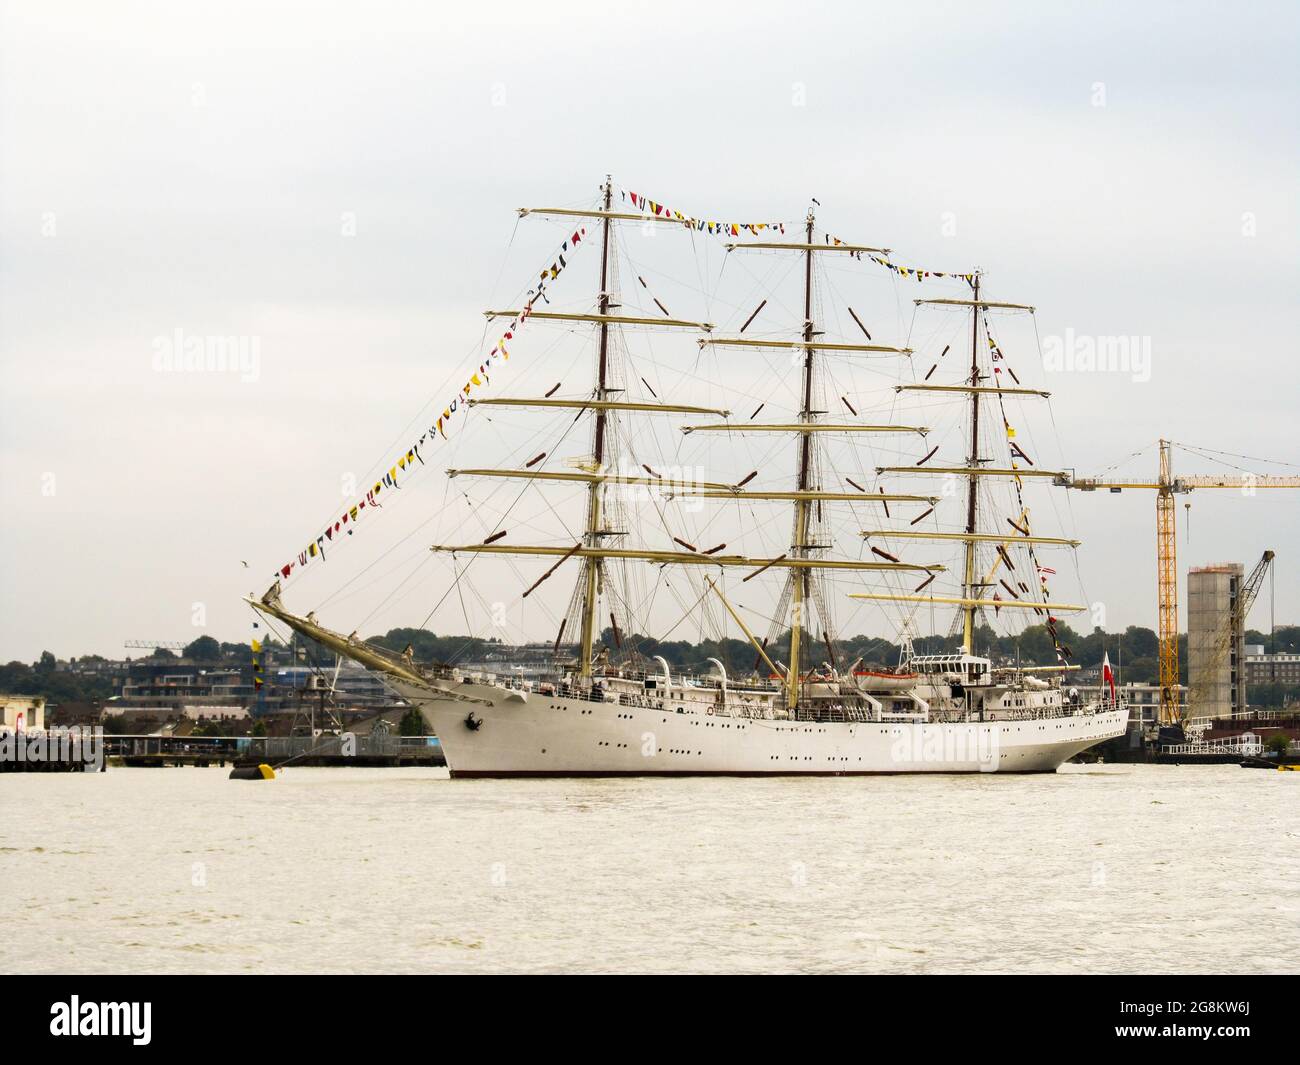 A large full rigged tall ship moored in the western part of the Thames river in the Greater London, UK Stock Photo